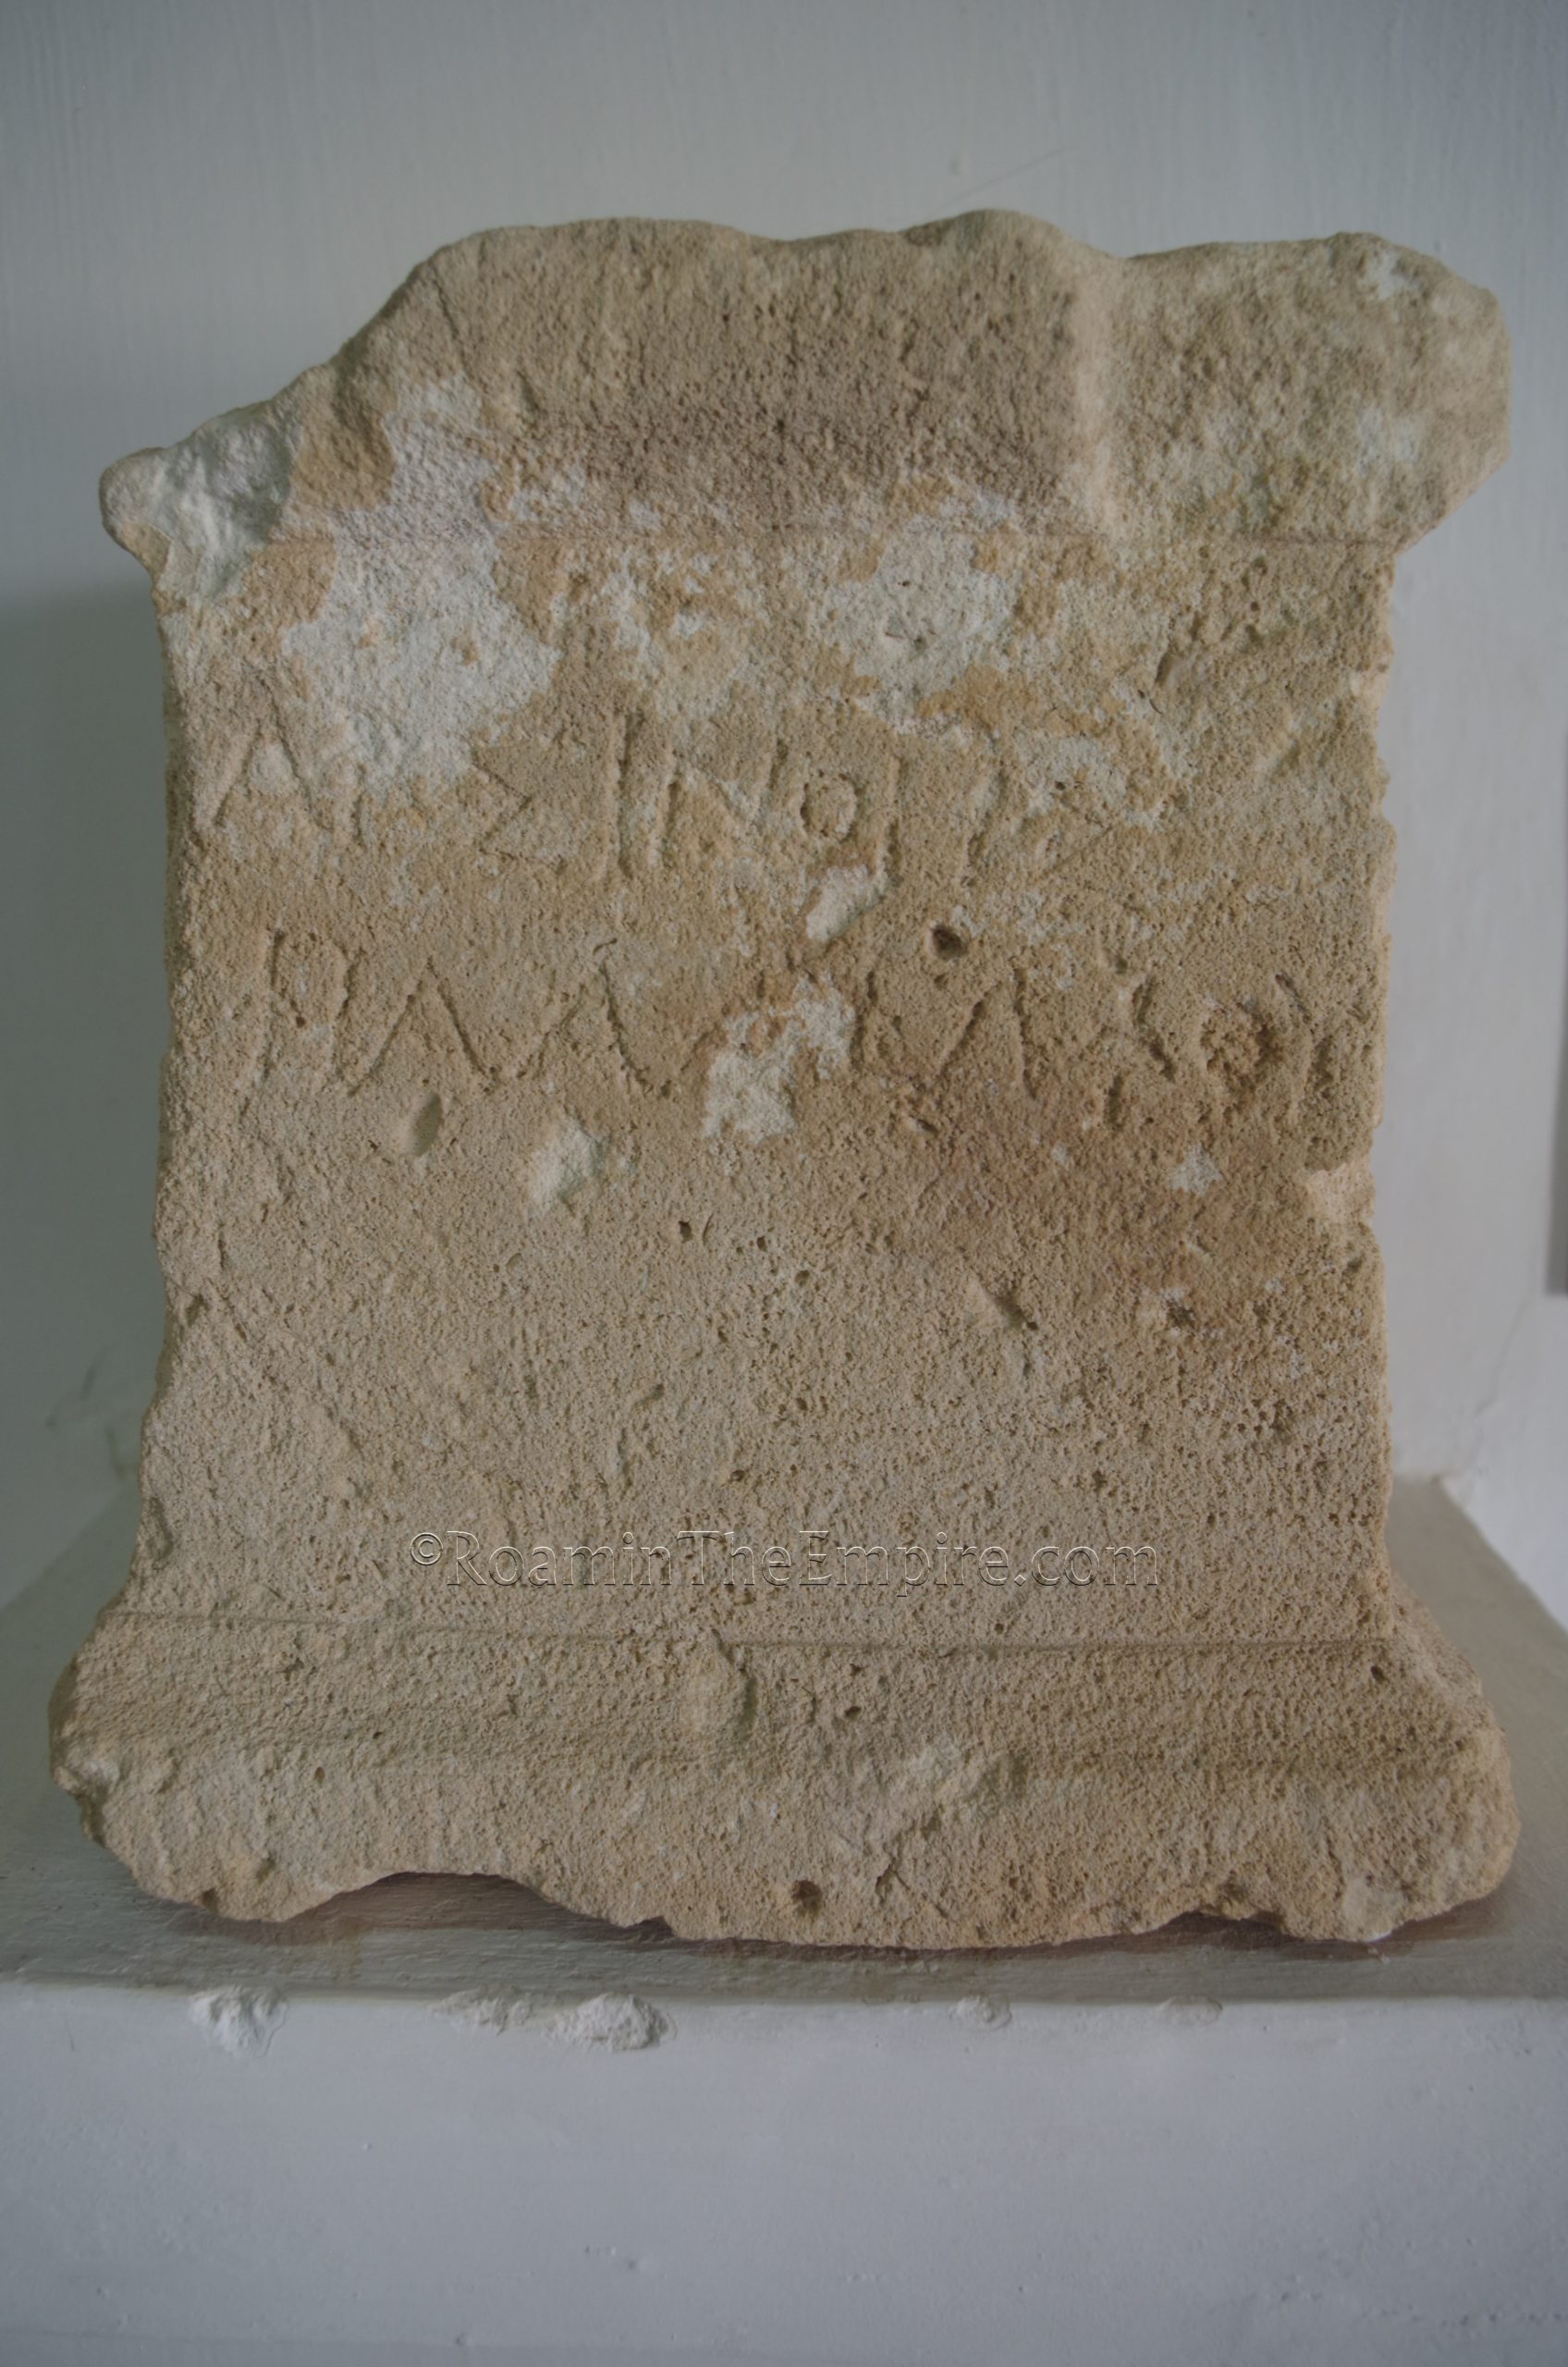 Inscribed altar to Arsinoe of Philadelphos; Arsinoe II, daughter of Ptolemy I Soter. Found at the sanctuary of Apollo Hylates. Dated to 270 BCE. In the Local Archaeological Museum of Kourion.